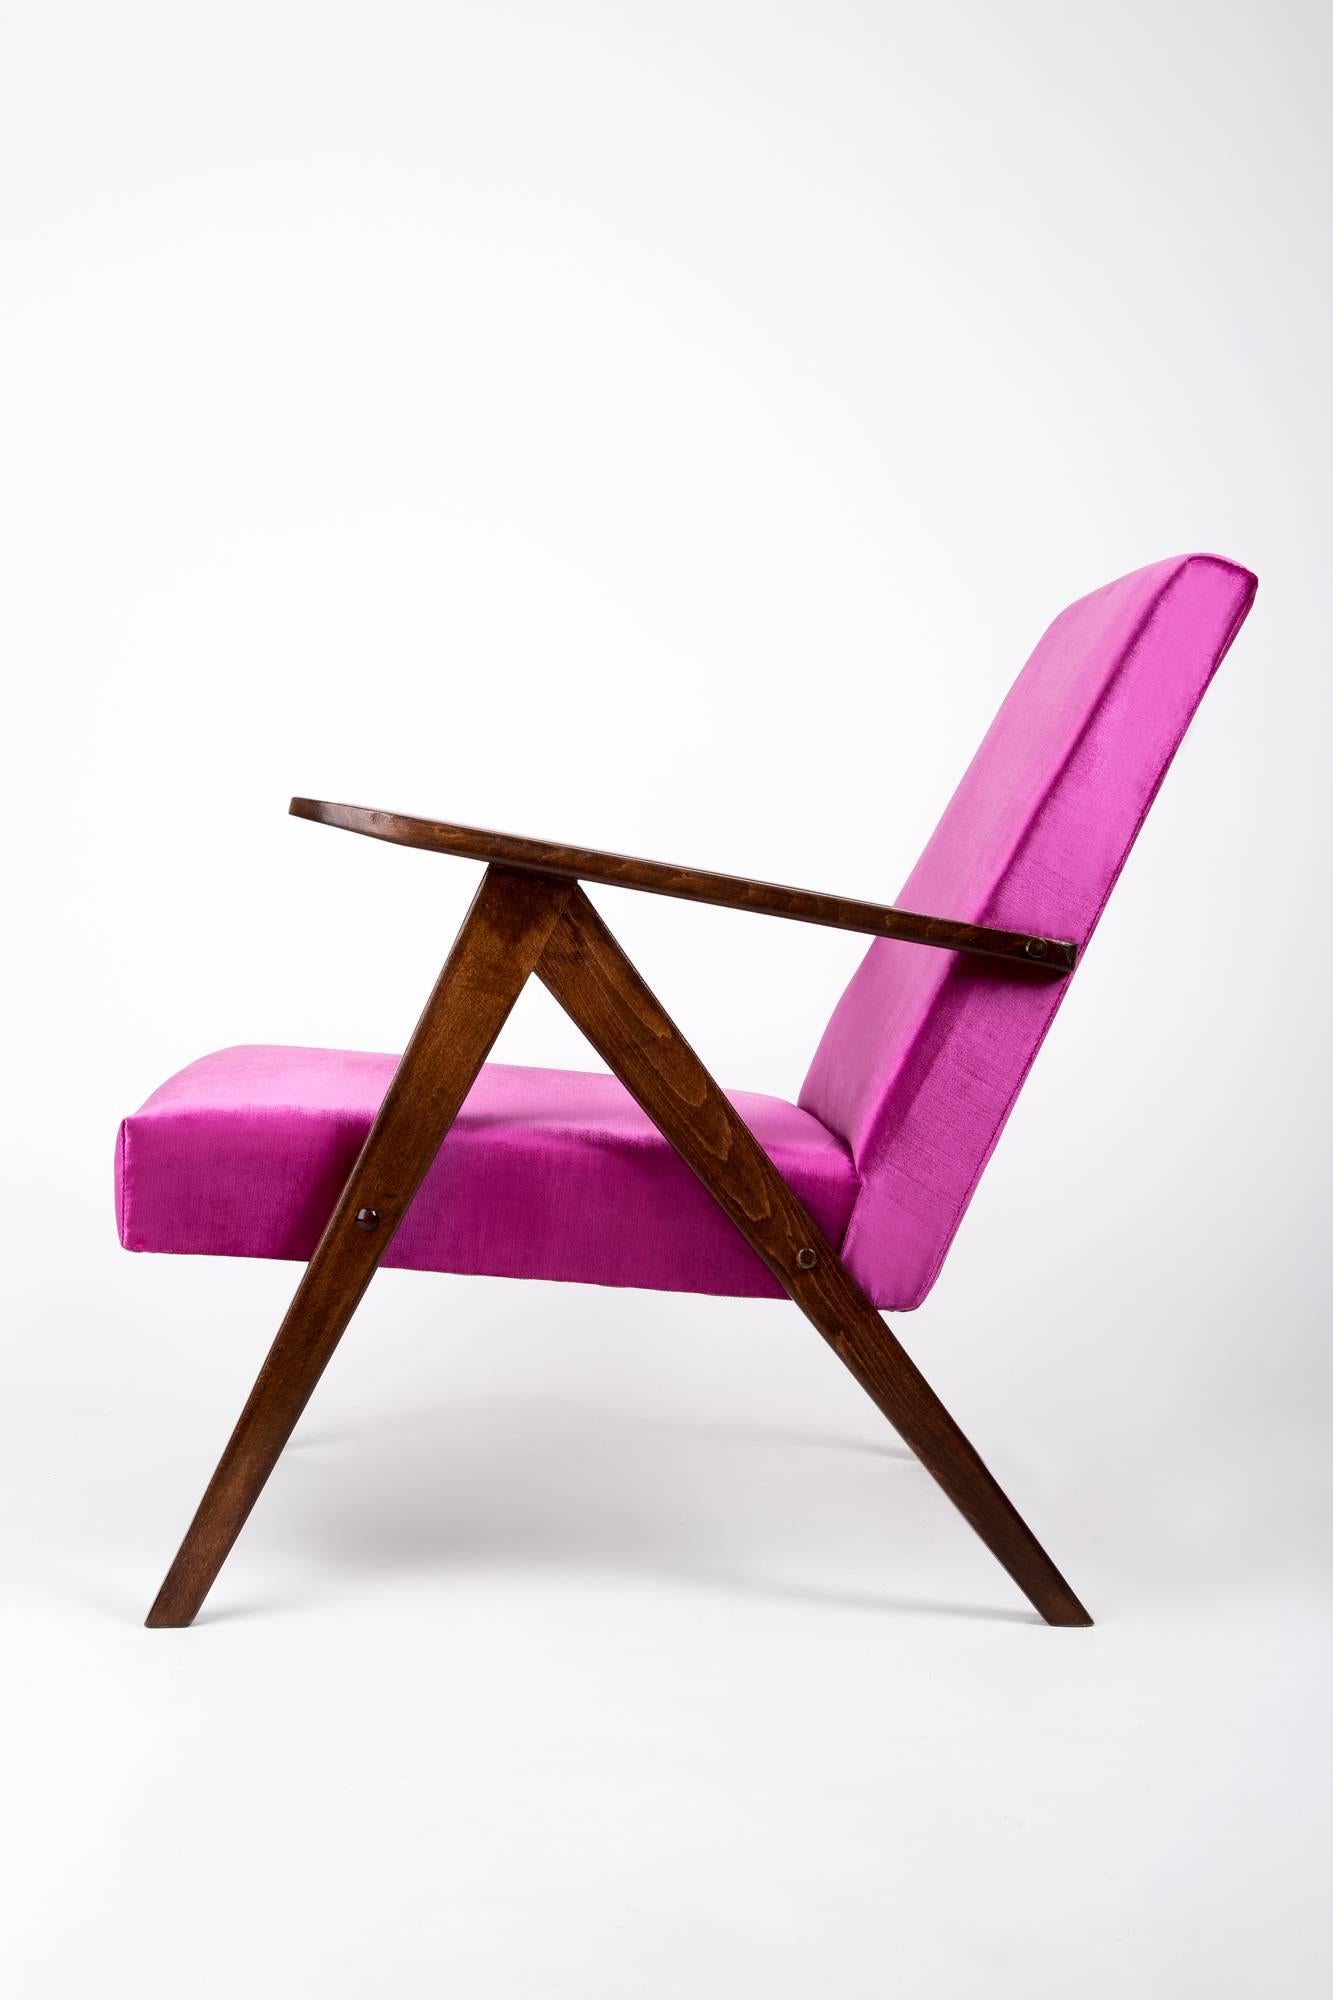 Hand-Crafted Mid-Century Modern Magenta Pink Armchair, B-310 VAR, 1960s, Poland For Sale